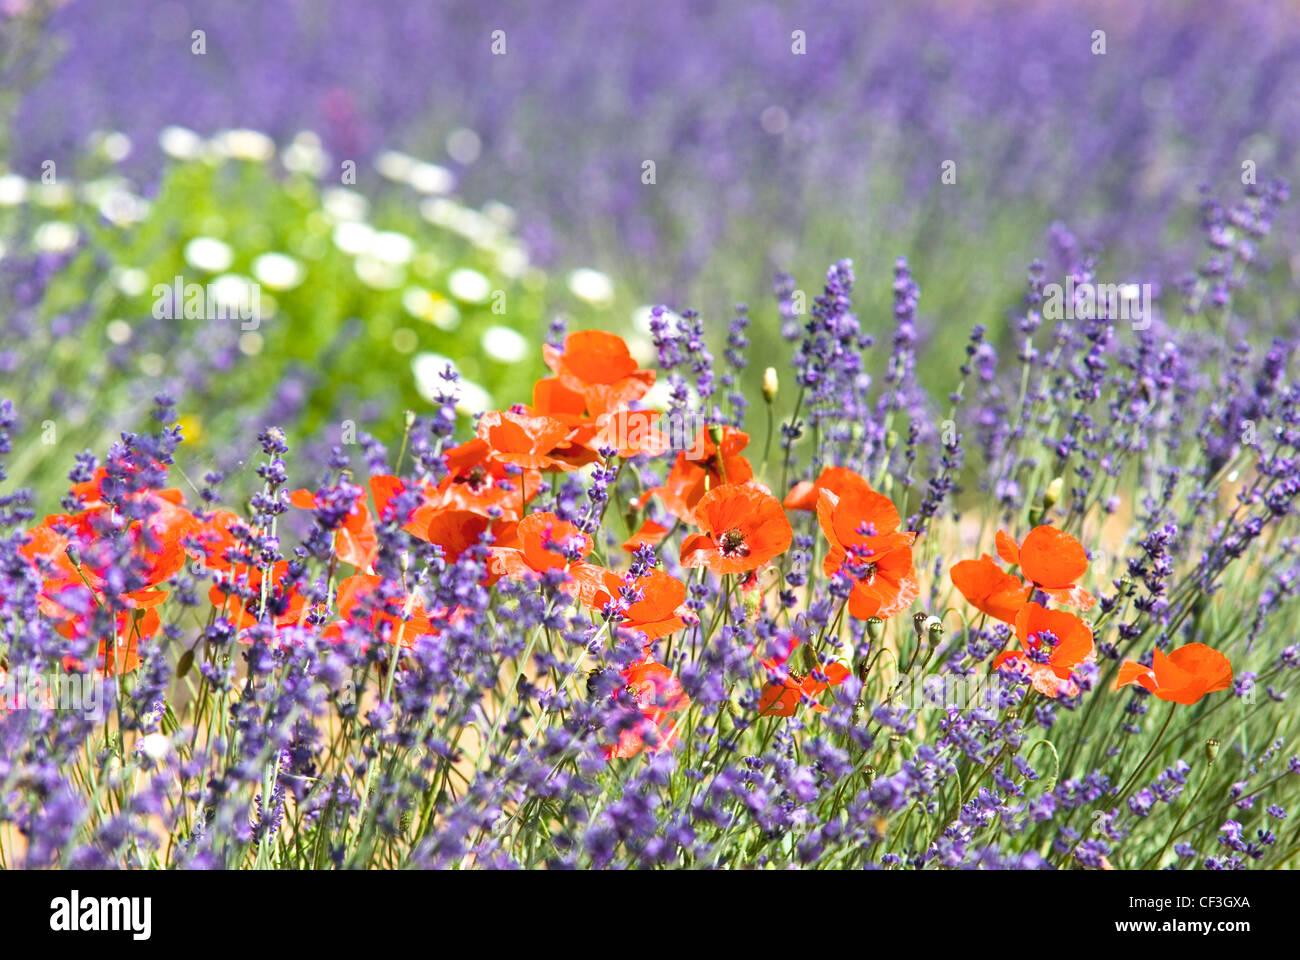 Poppies And Daisies Growing Wild Amongst A Field Of Lavender Provence